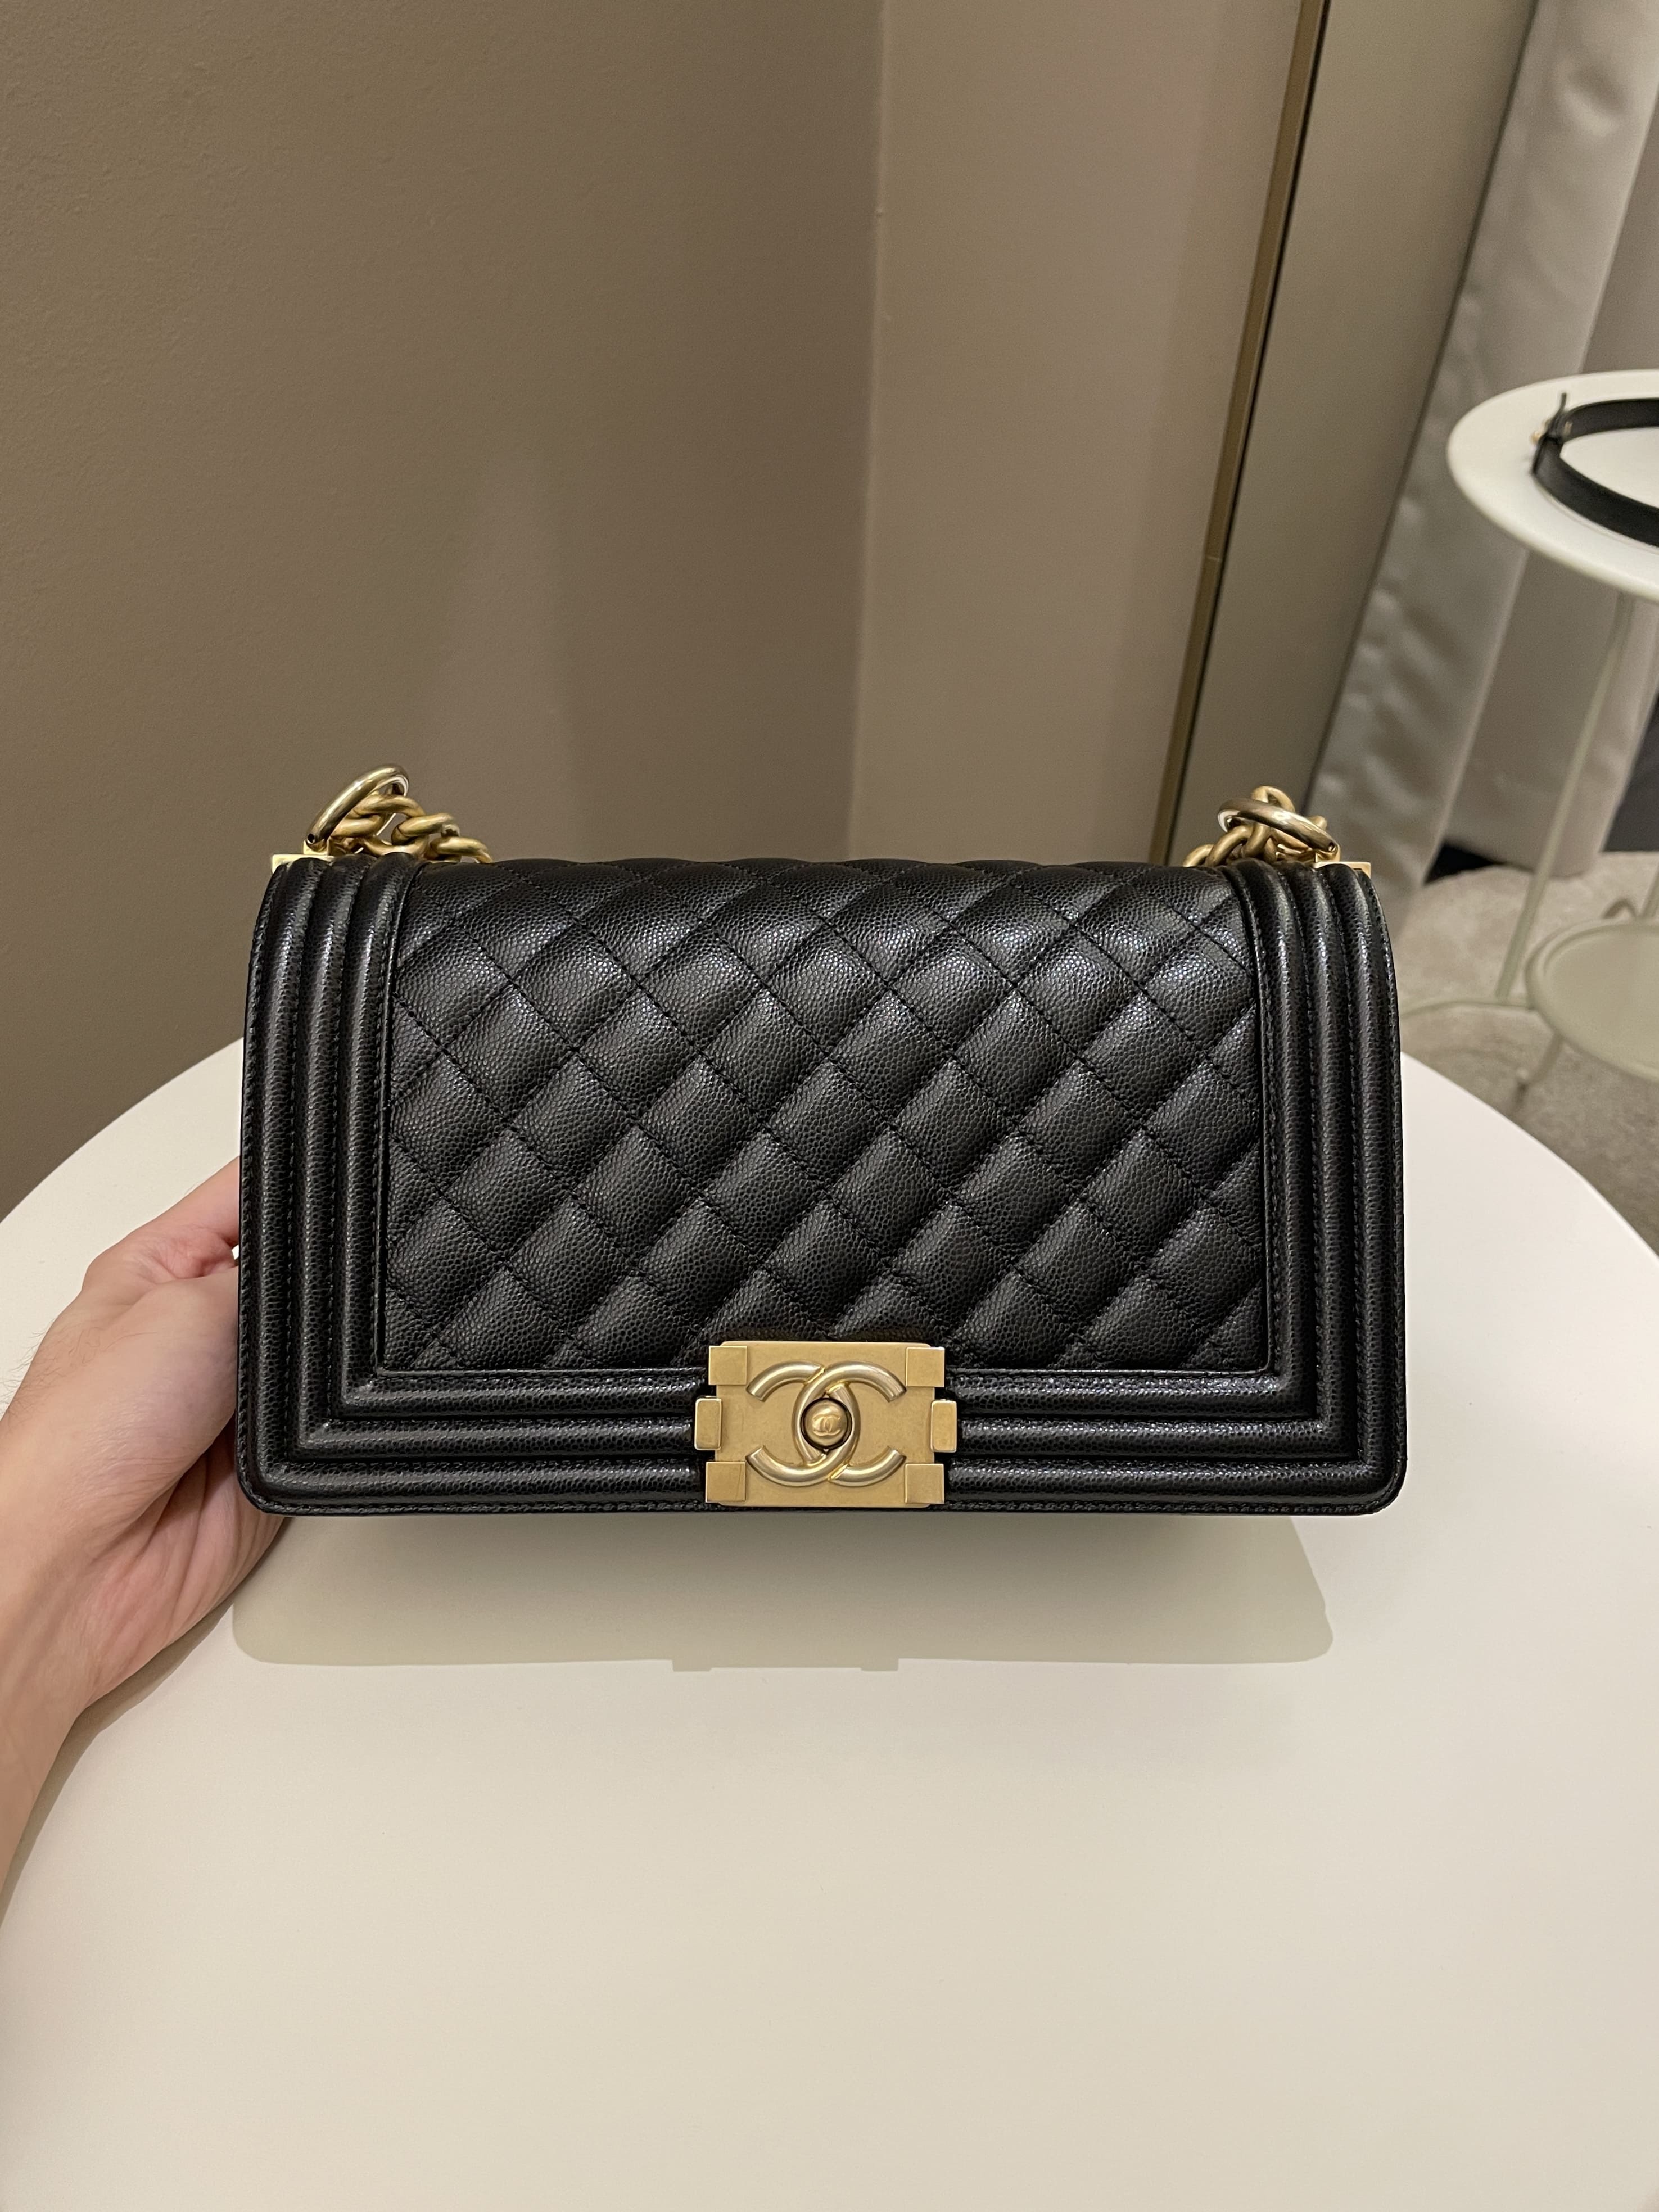 Chanel Timeless Classic 2.55 Jumbo Flap Bag in Black Caviar with